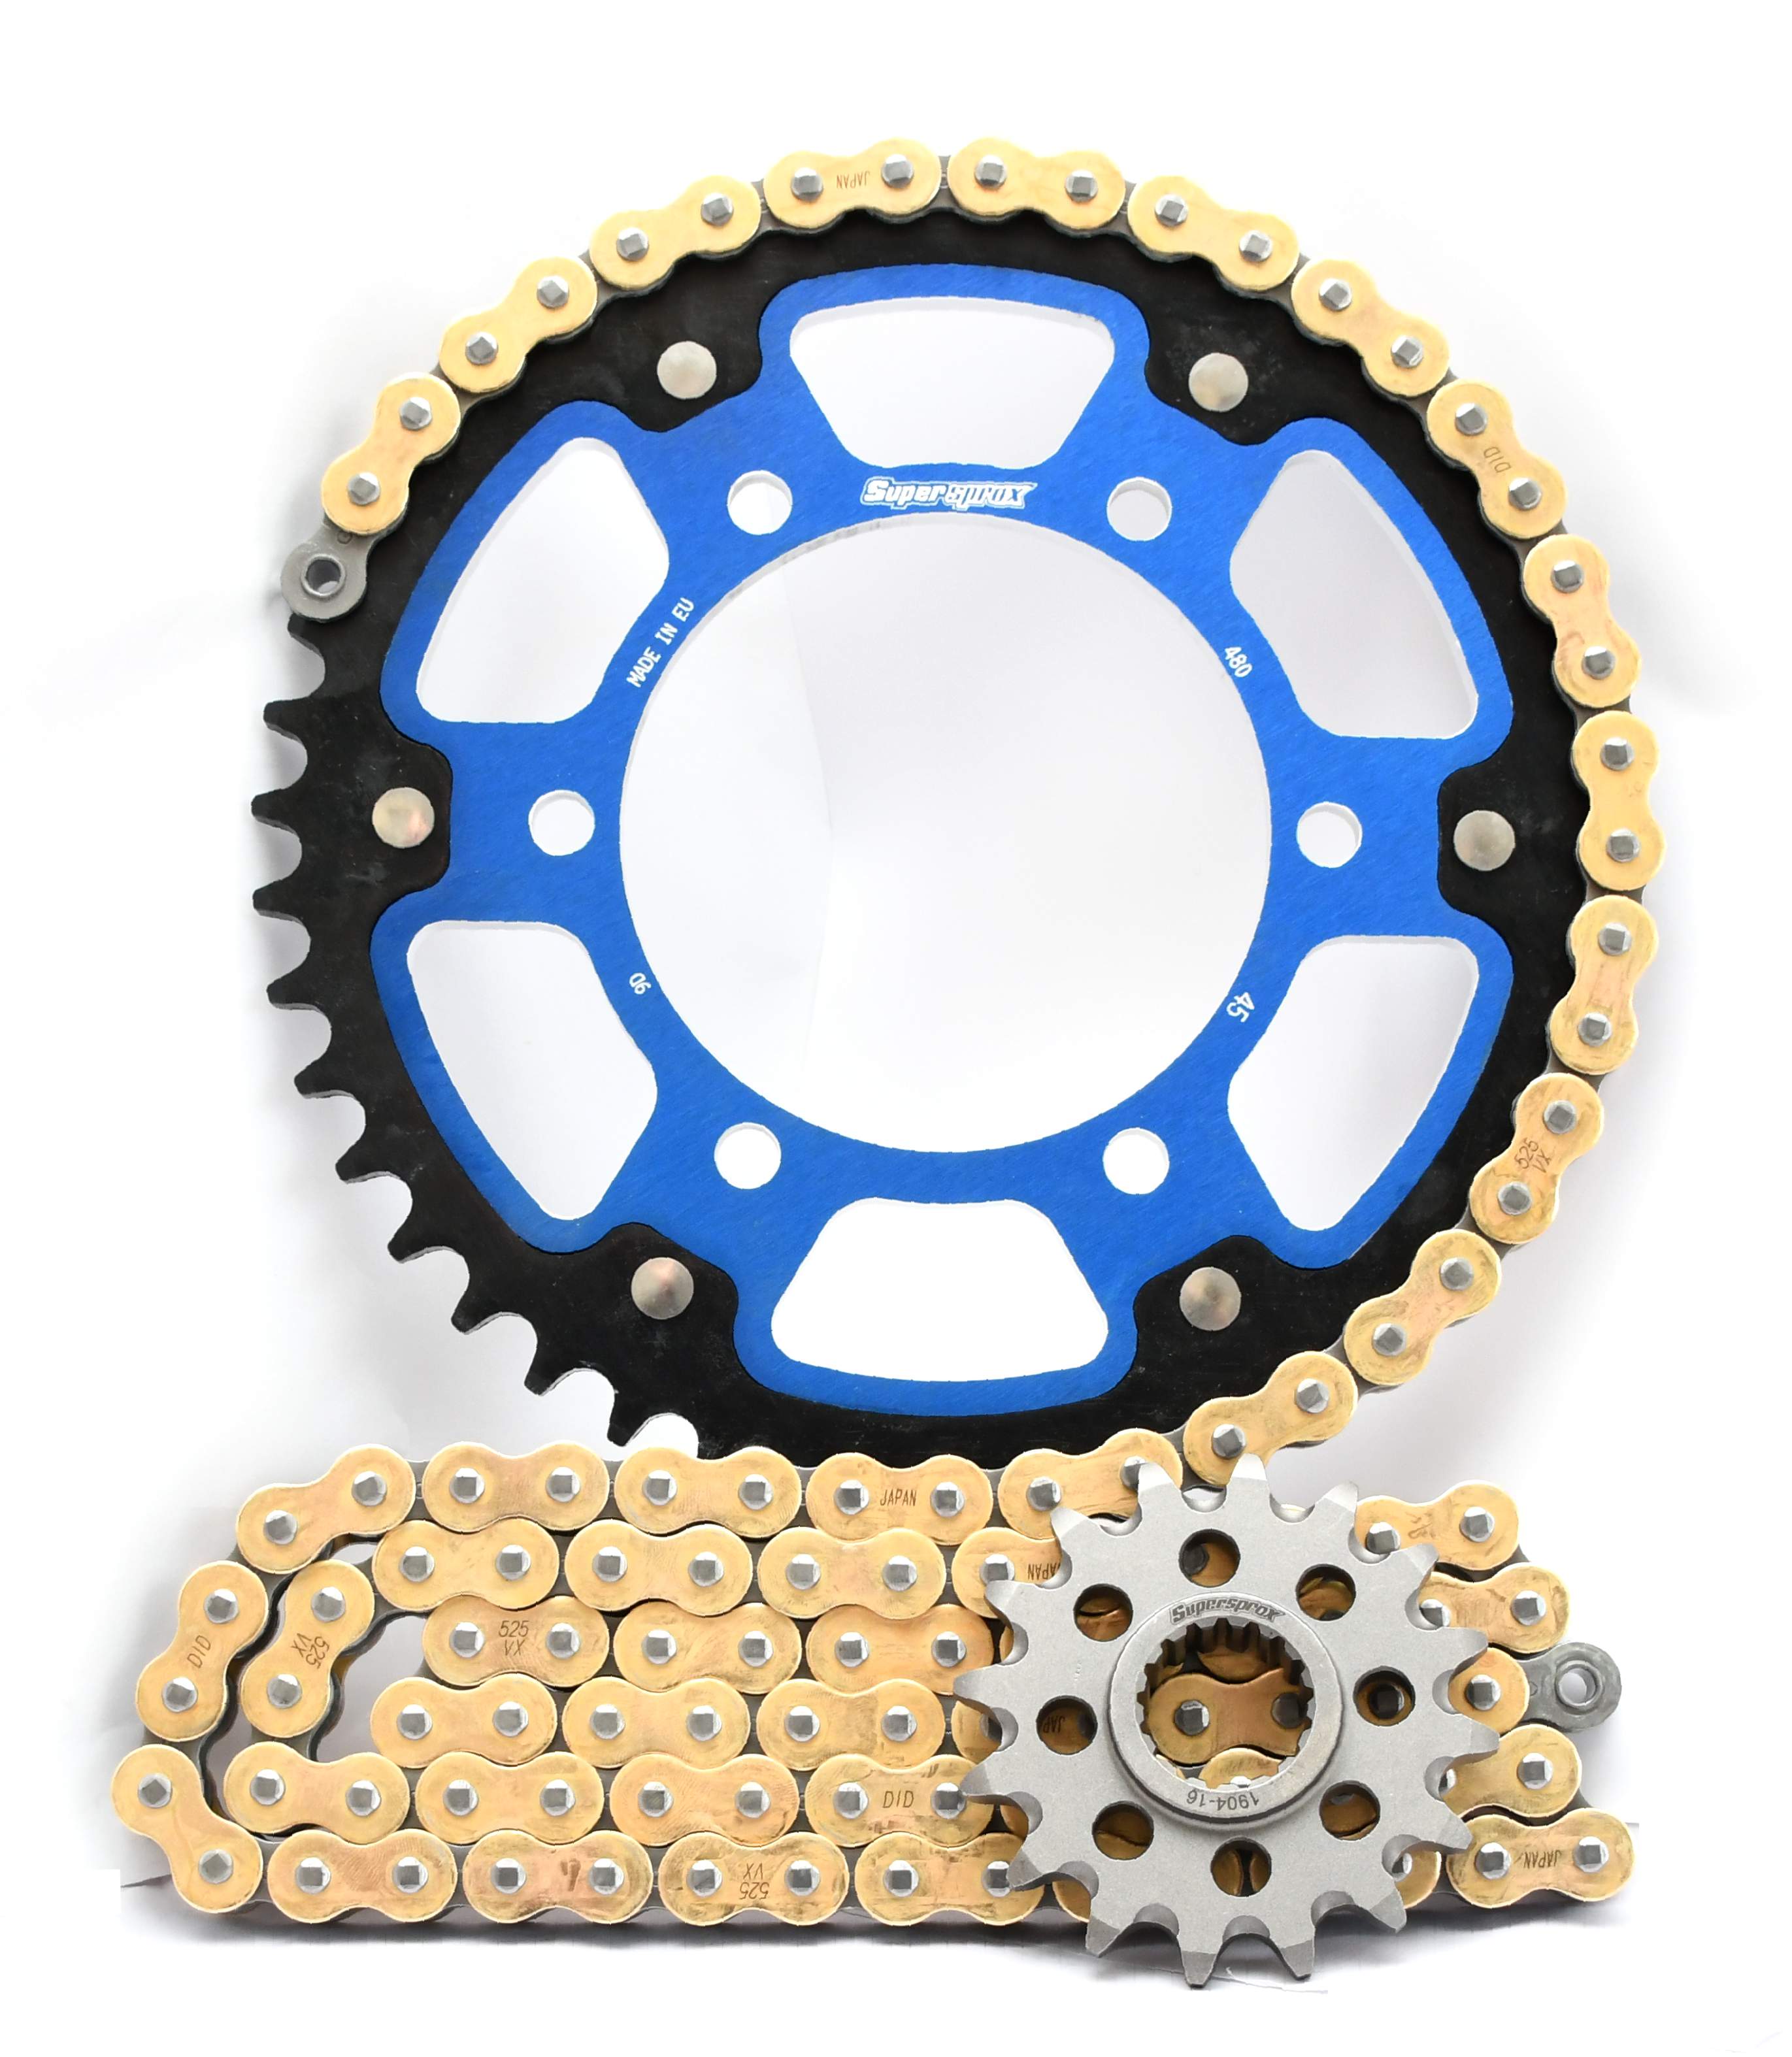 Supersprox Chain & Sprocket Kit for Yamaha MT-07 14> - Standard Gearing - 0